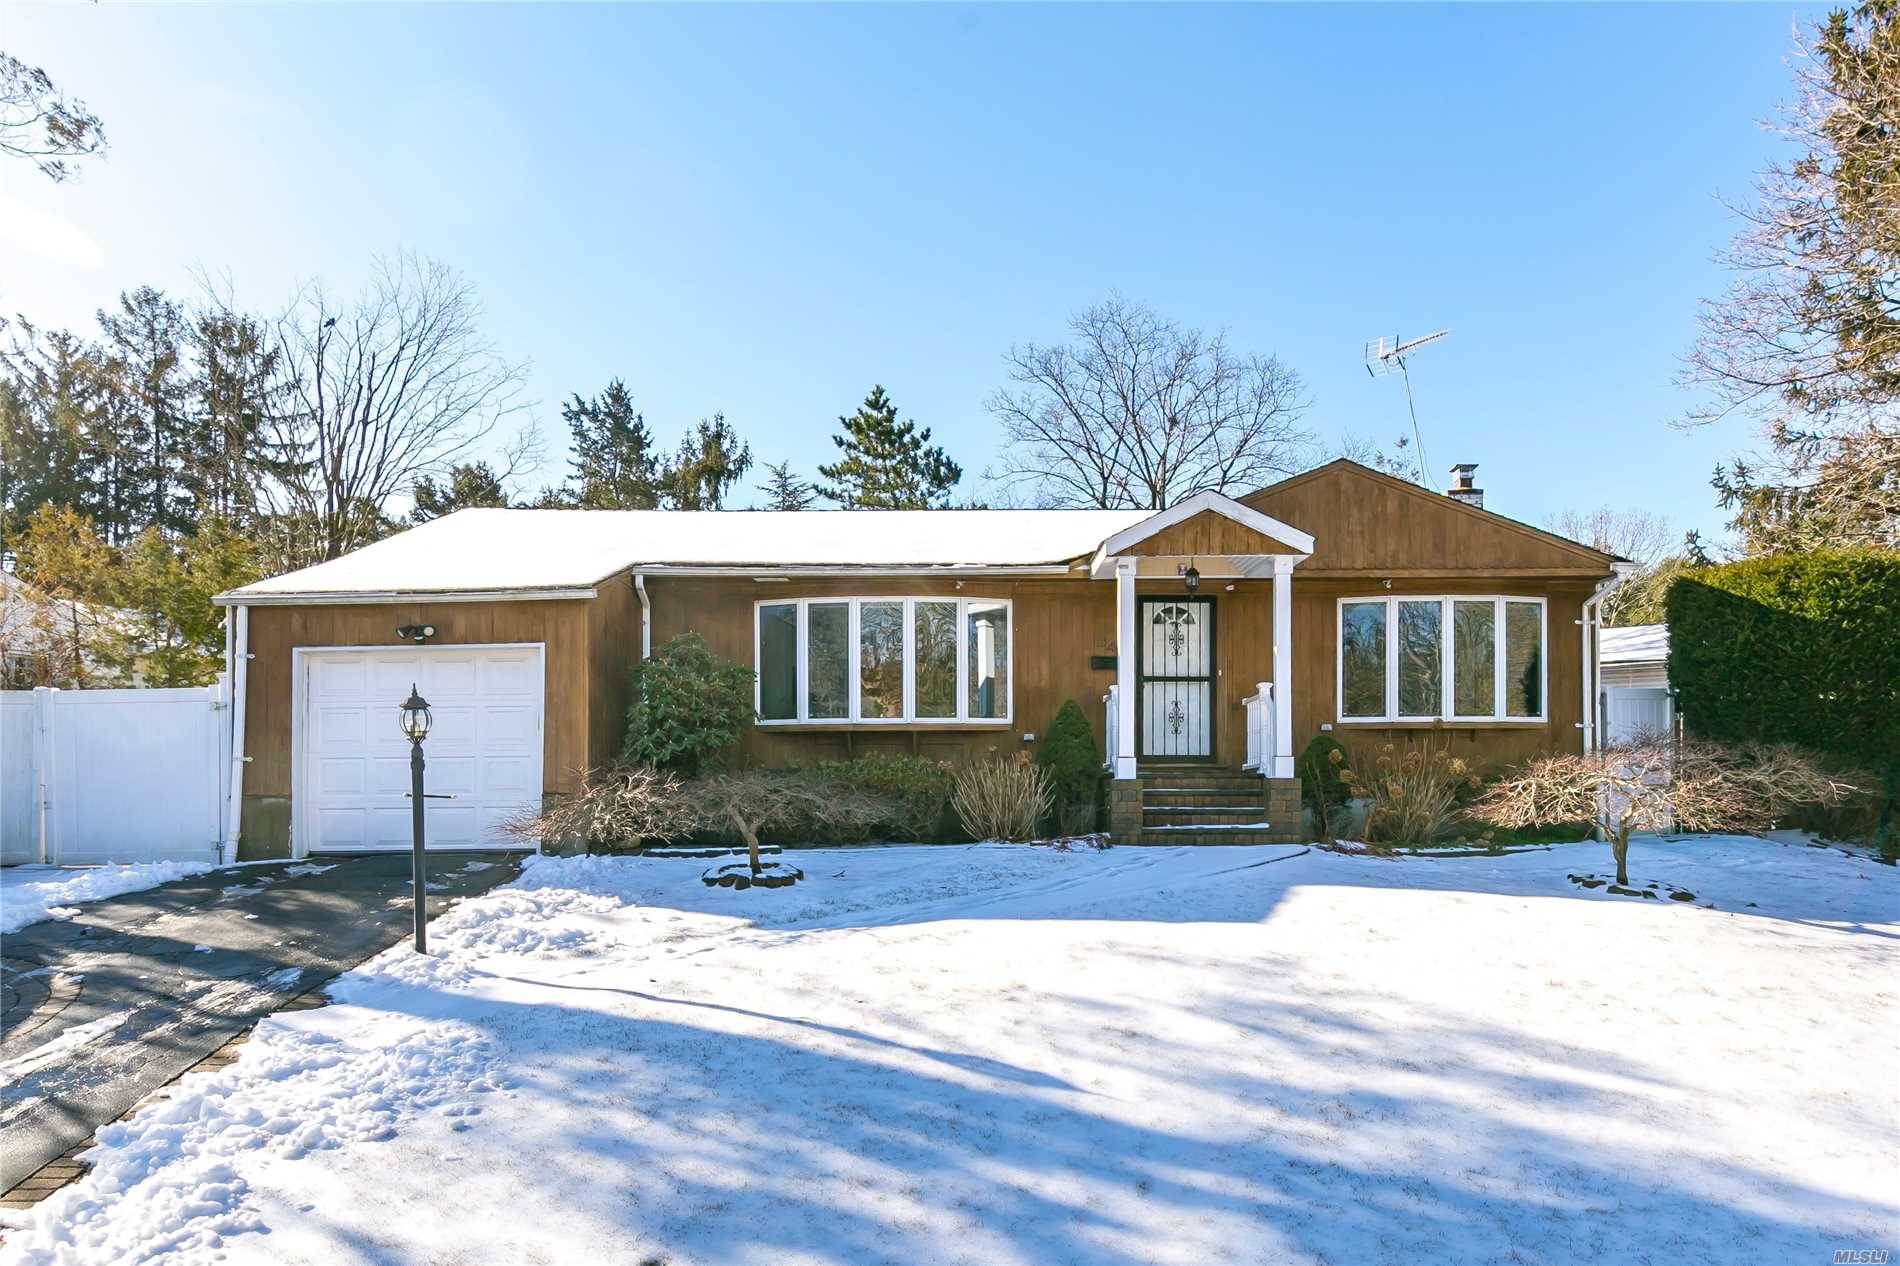 This Cozy Ranch In North Syosset Is Filled With Charm, Light And An Easy, Open Floor Plan.